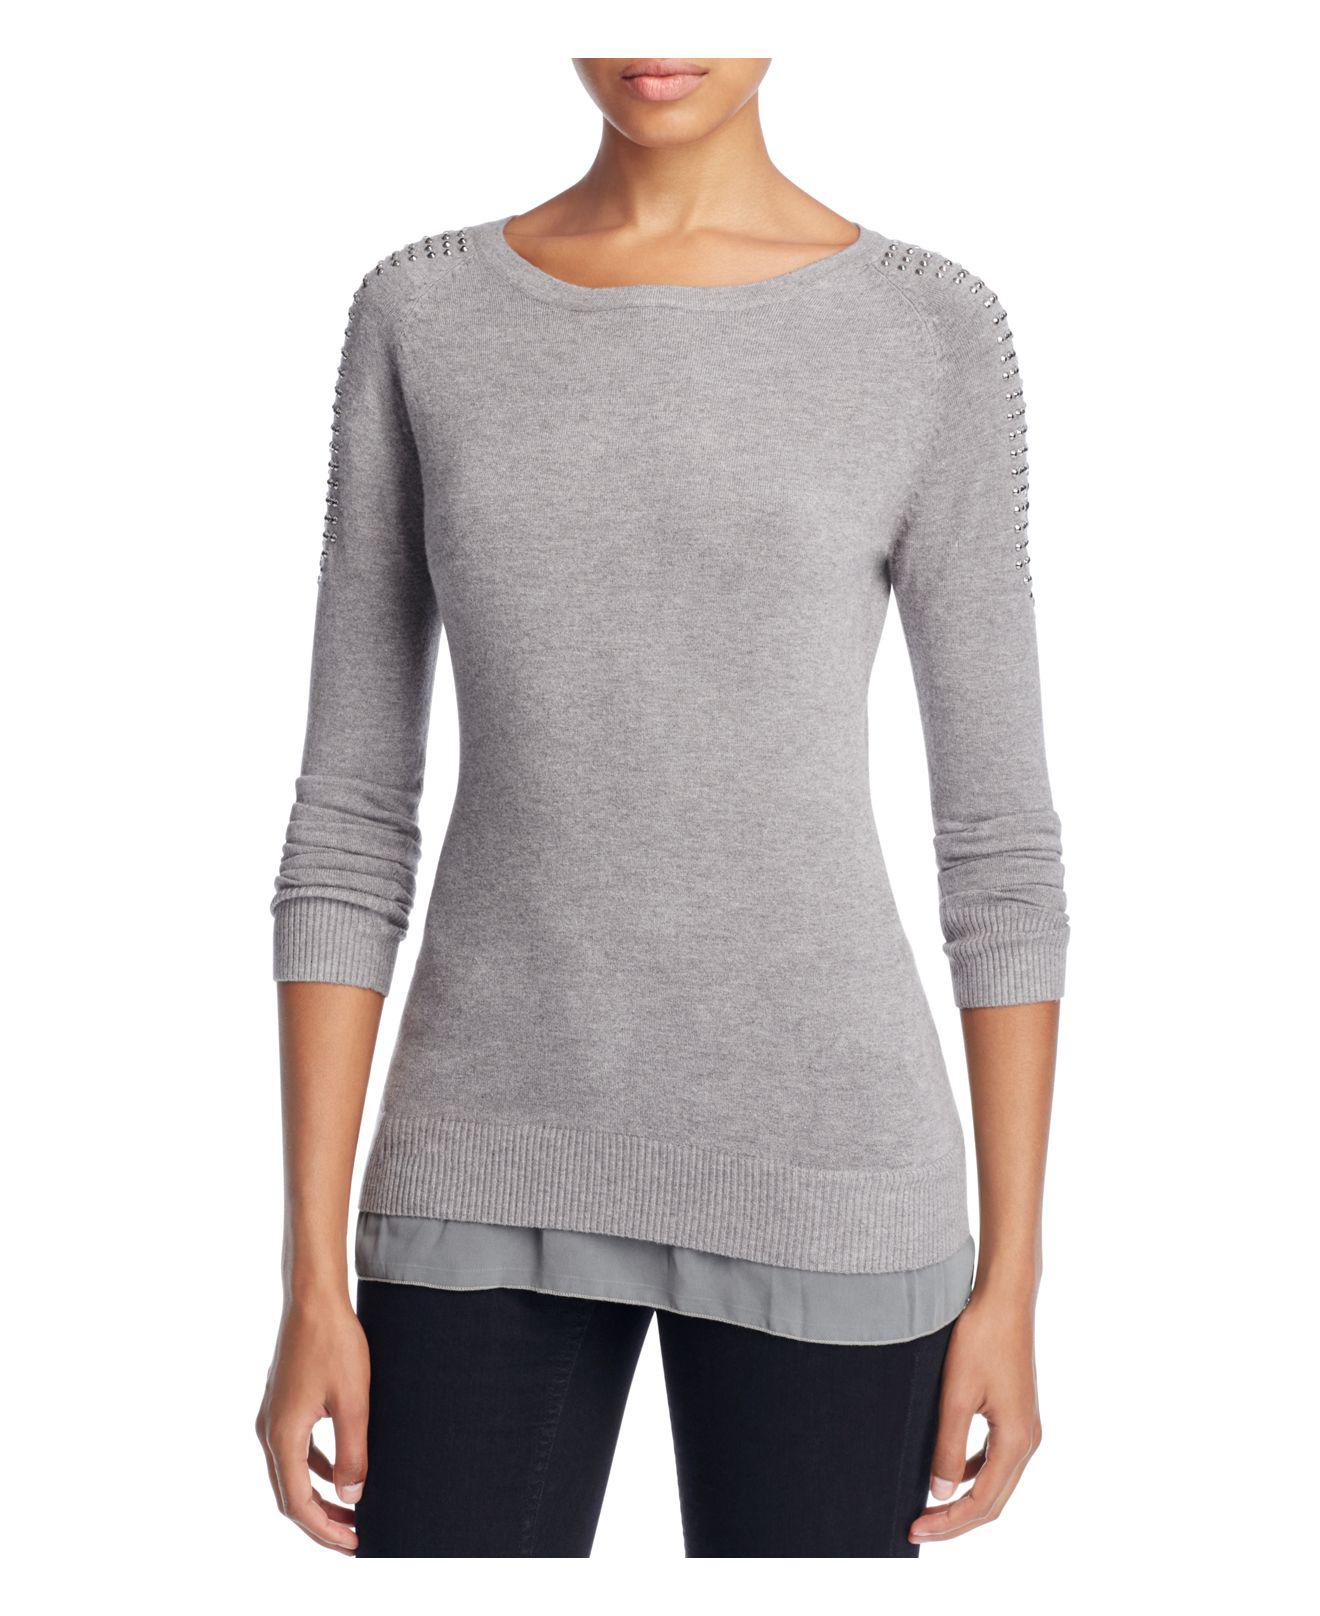 Sioni Synthetic Studded Woven Sweater in Heather Ash (Gray) - Lyst